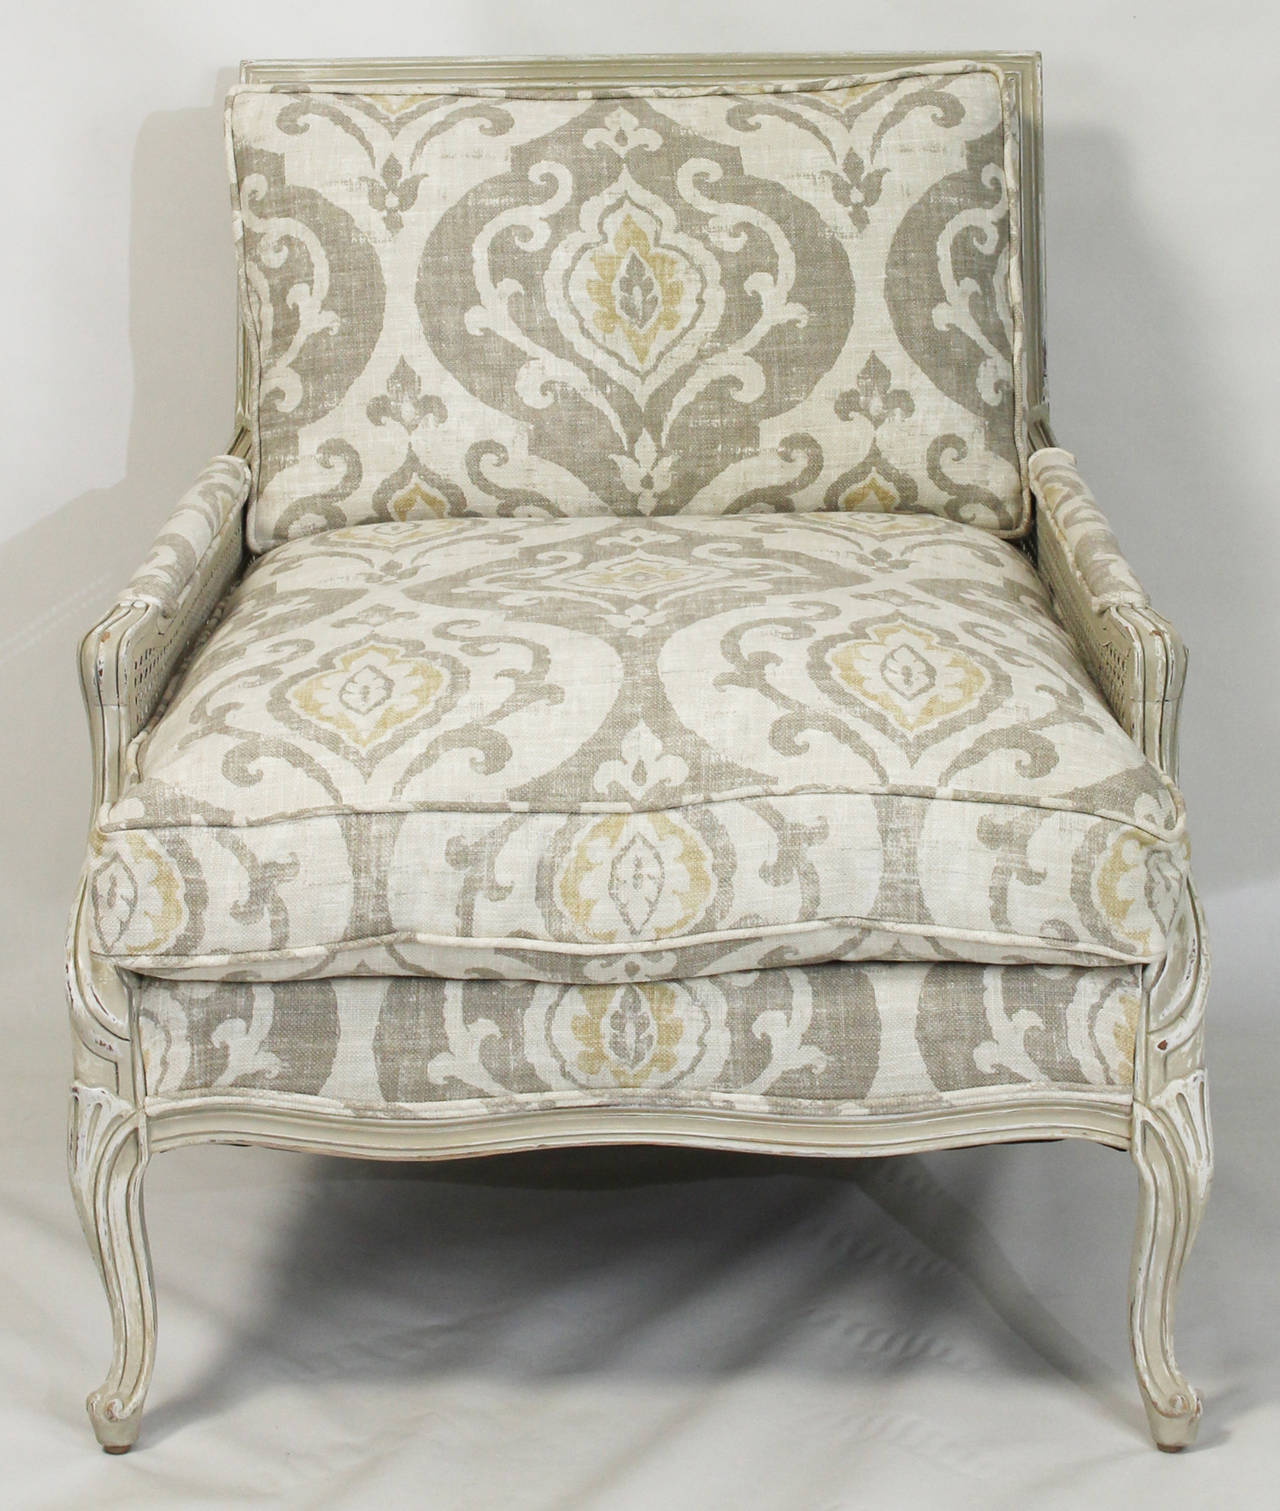 A large French style Bergere dating from the 1940s with cane back and sides in a distressed soft grey paint finish with down seat and back cushions covered in Italian linen fabric.